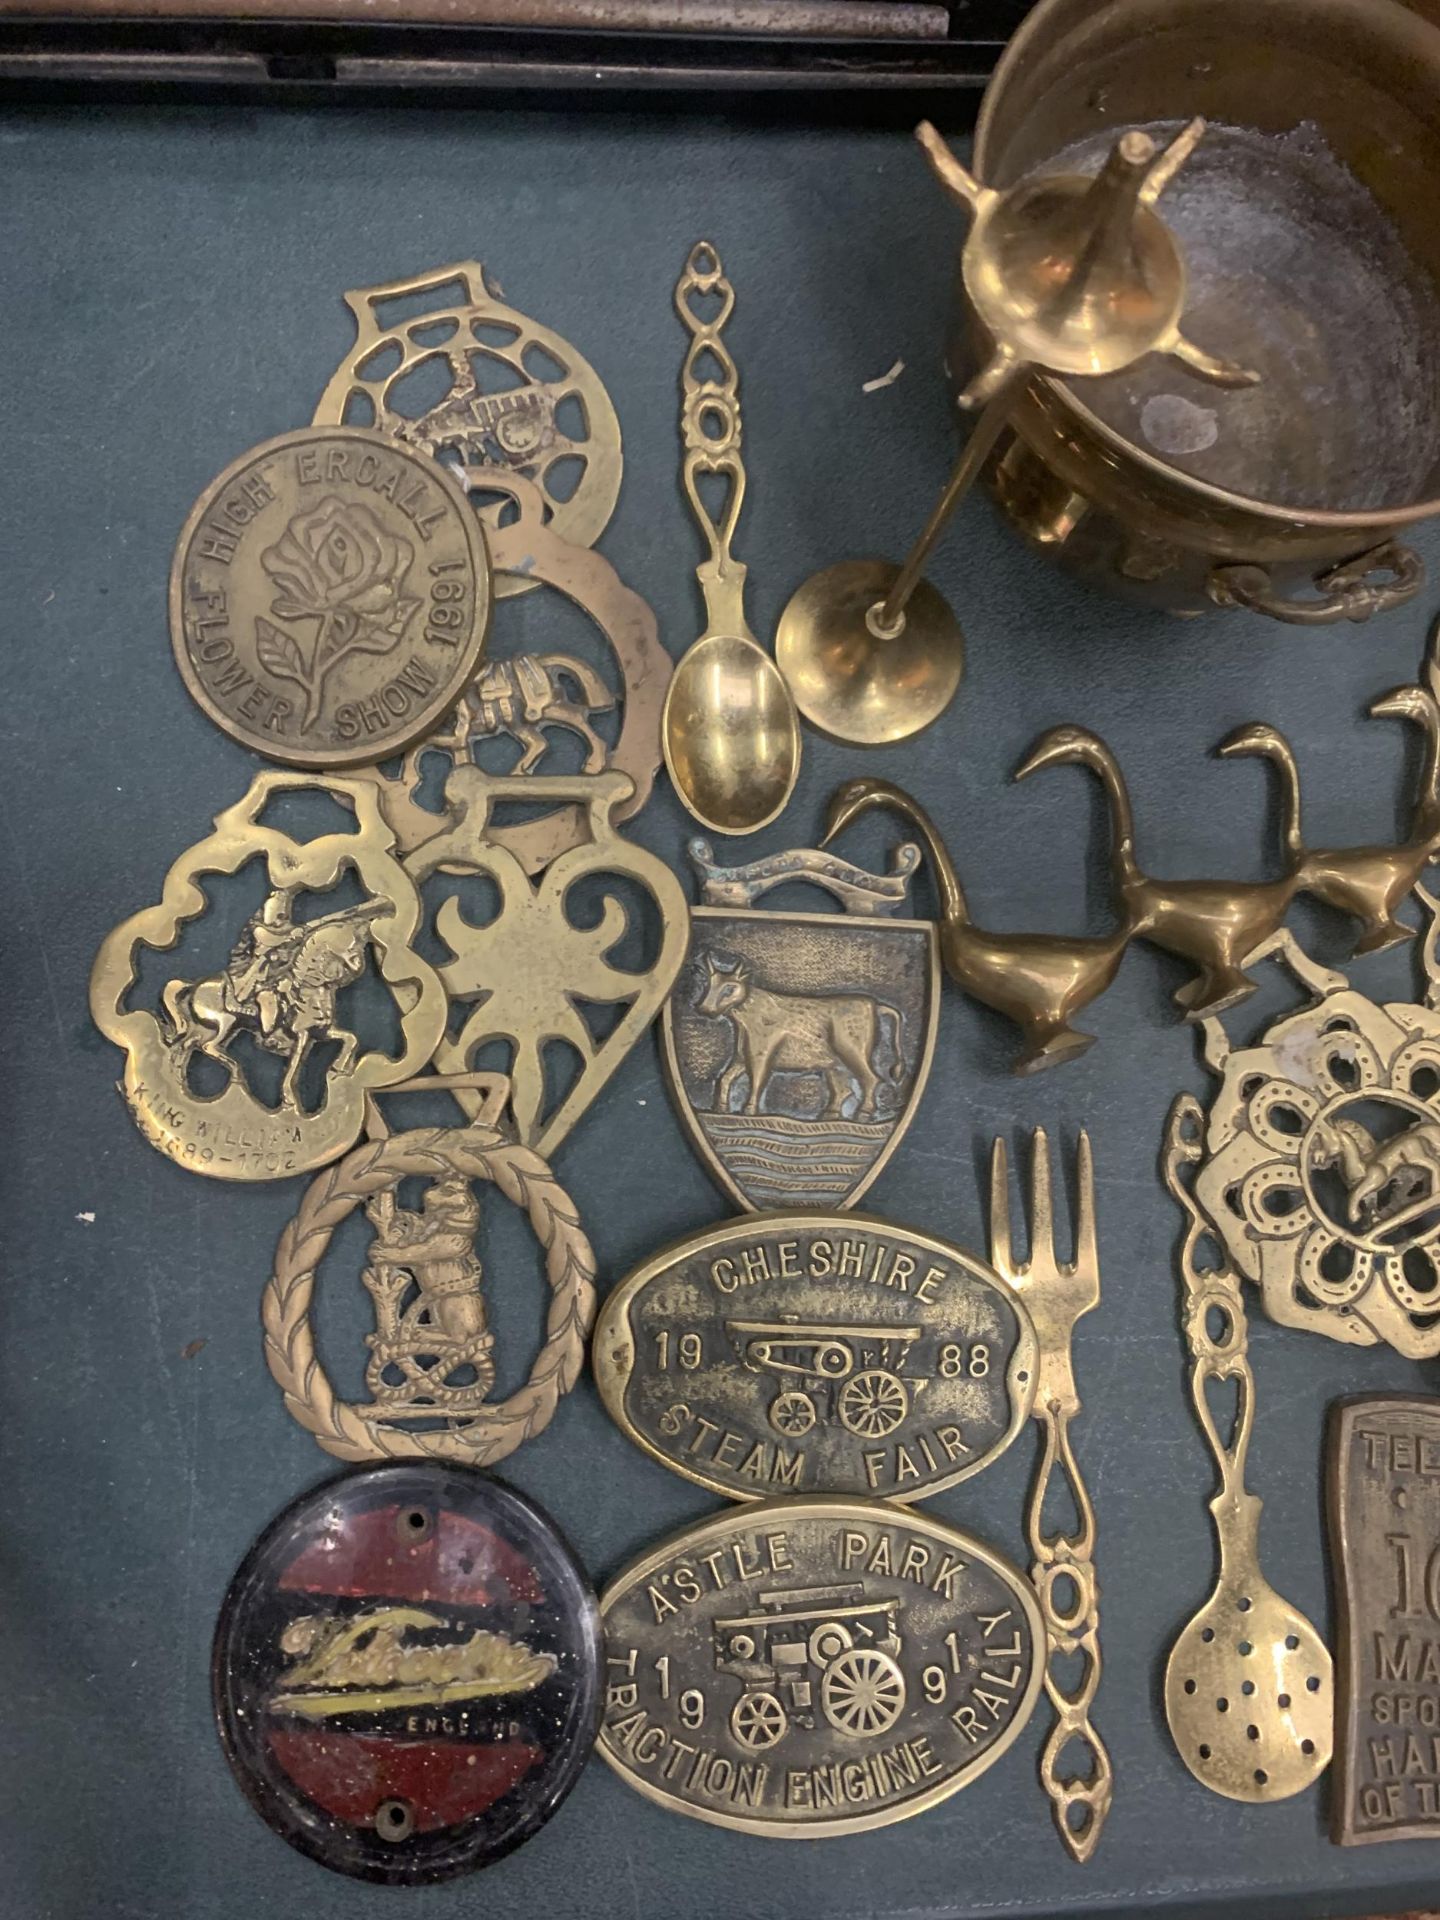 A ALRGE COLLECTION OF BRASS ITEMS TO INCLUDE HORSE BRASSES, STEAM FAIR BADGES, DISHES ETC - Image 4 of 4